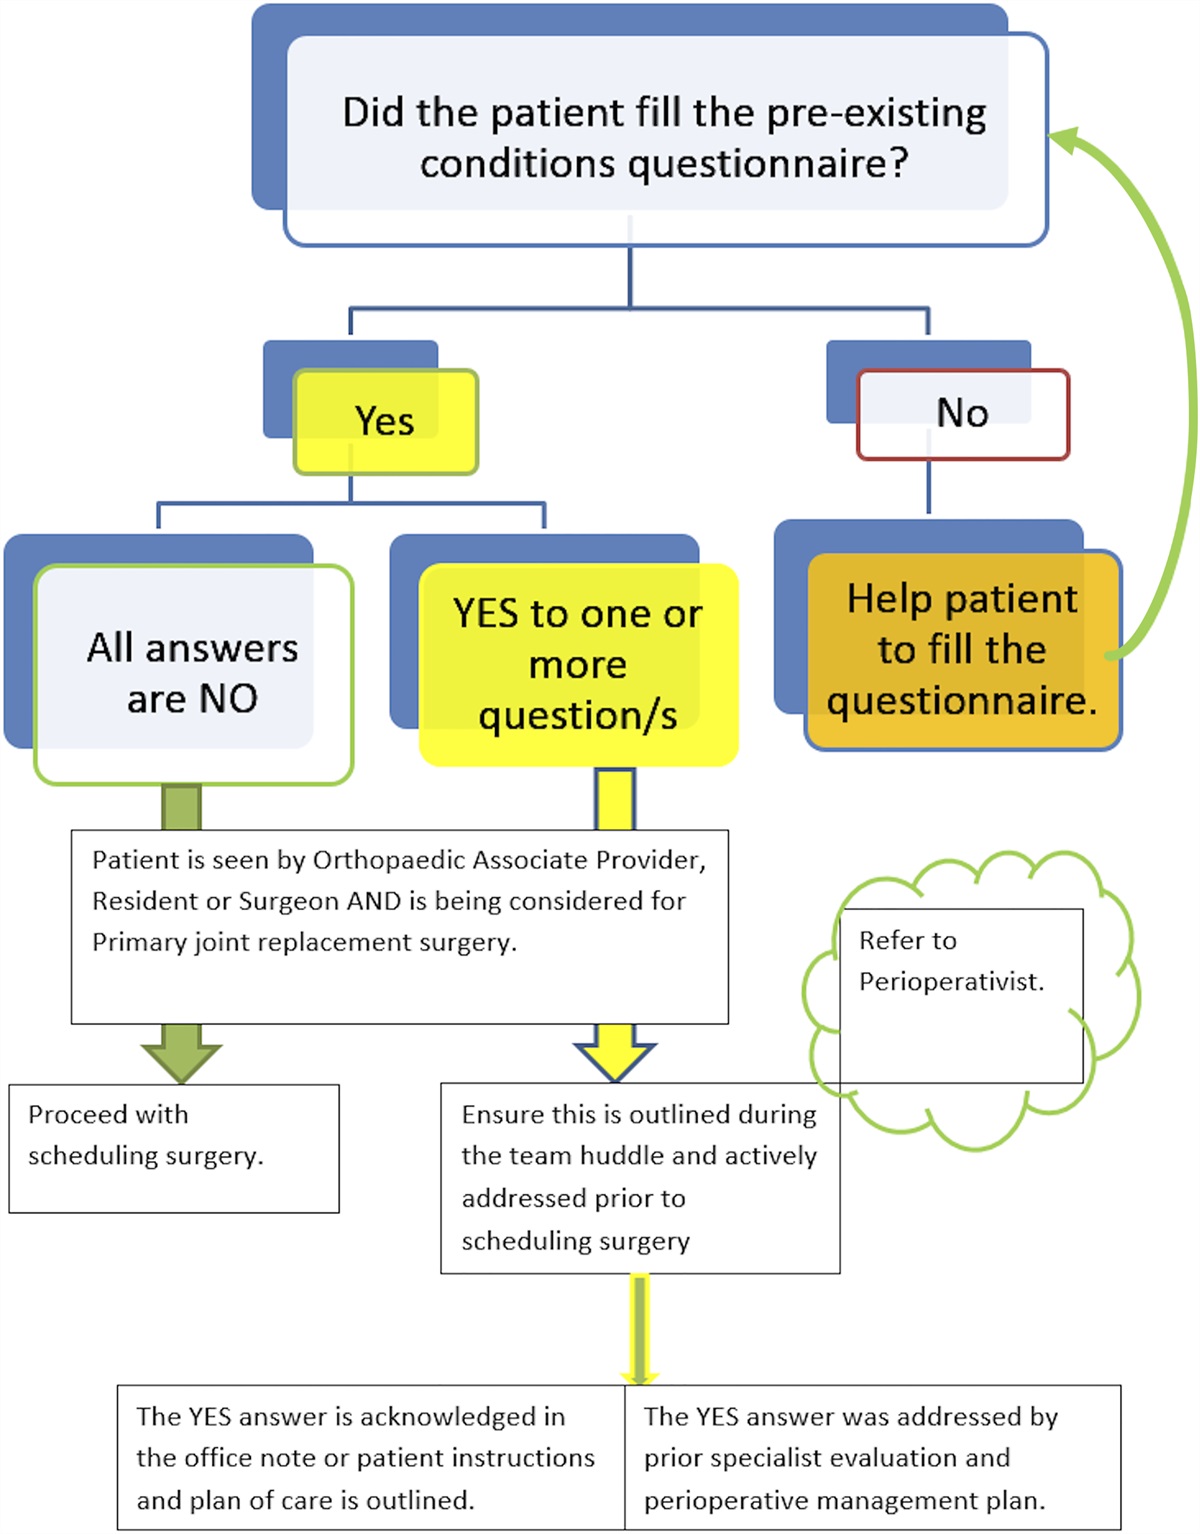 The Impact of Preoperative Medical Evaluation in an Orthopaedic Perioperative Medical Clinic on Total Joint Arthroplasty Outcomes: An Observational Study